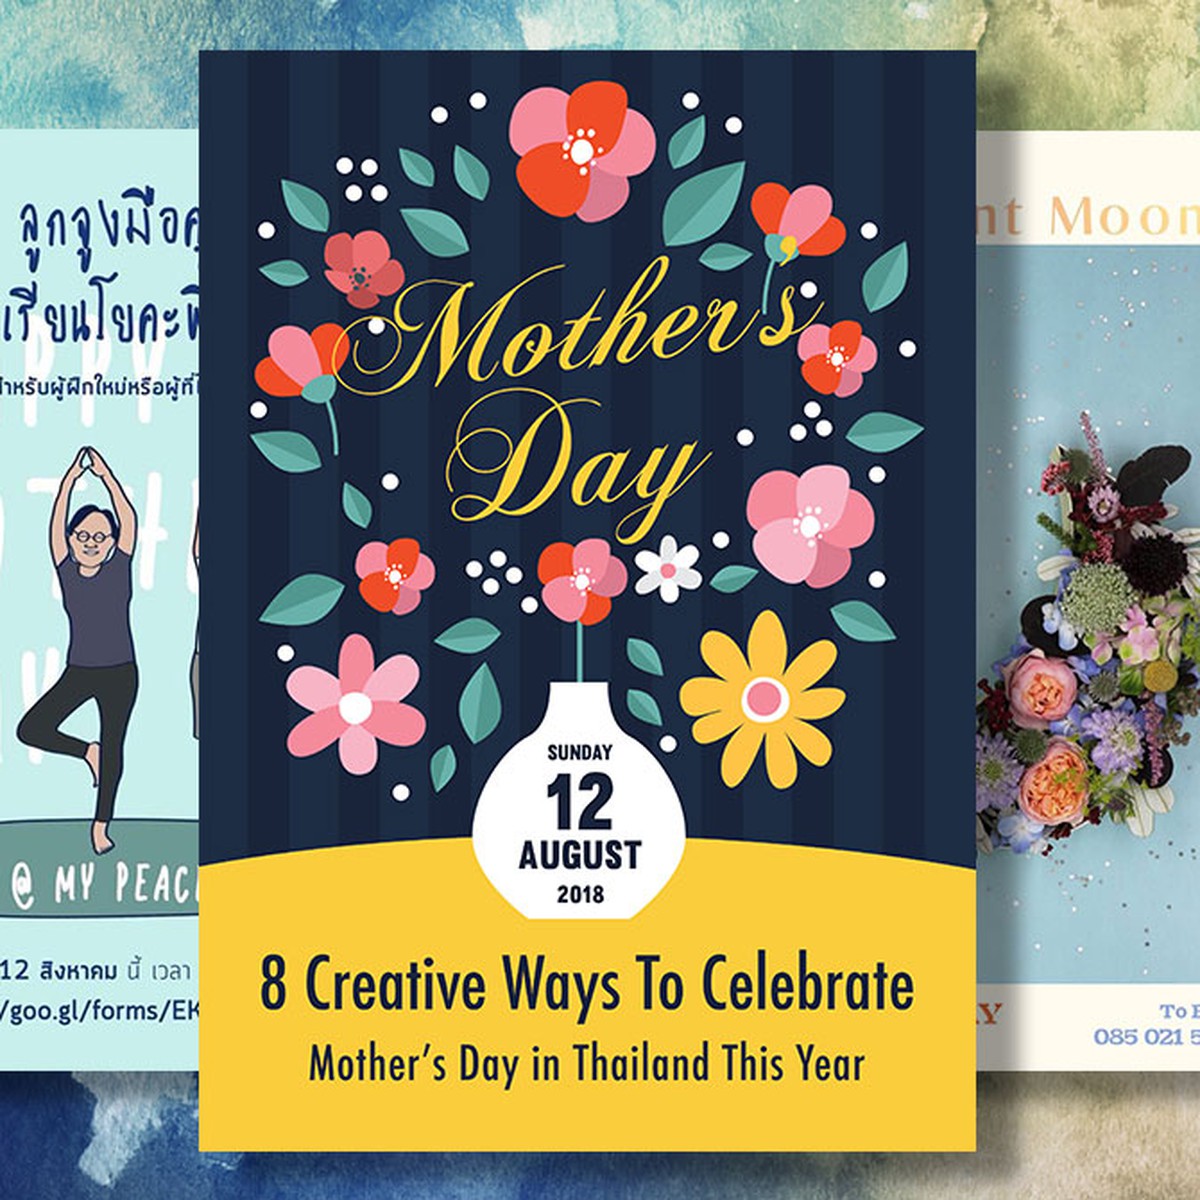 Top 5 bags to get for your mother this Thai Mother's day